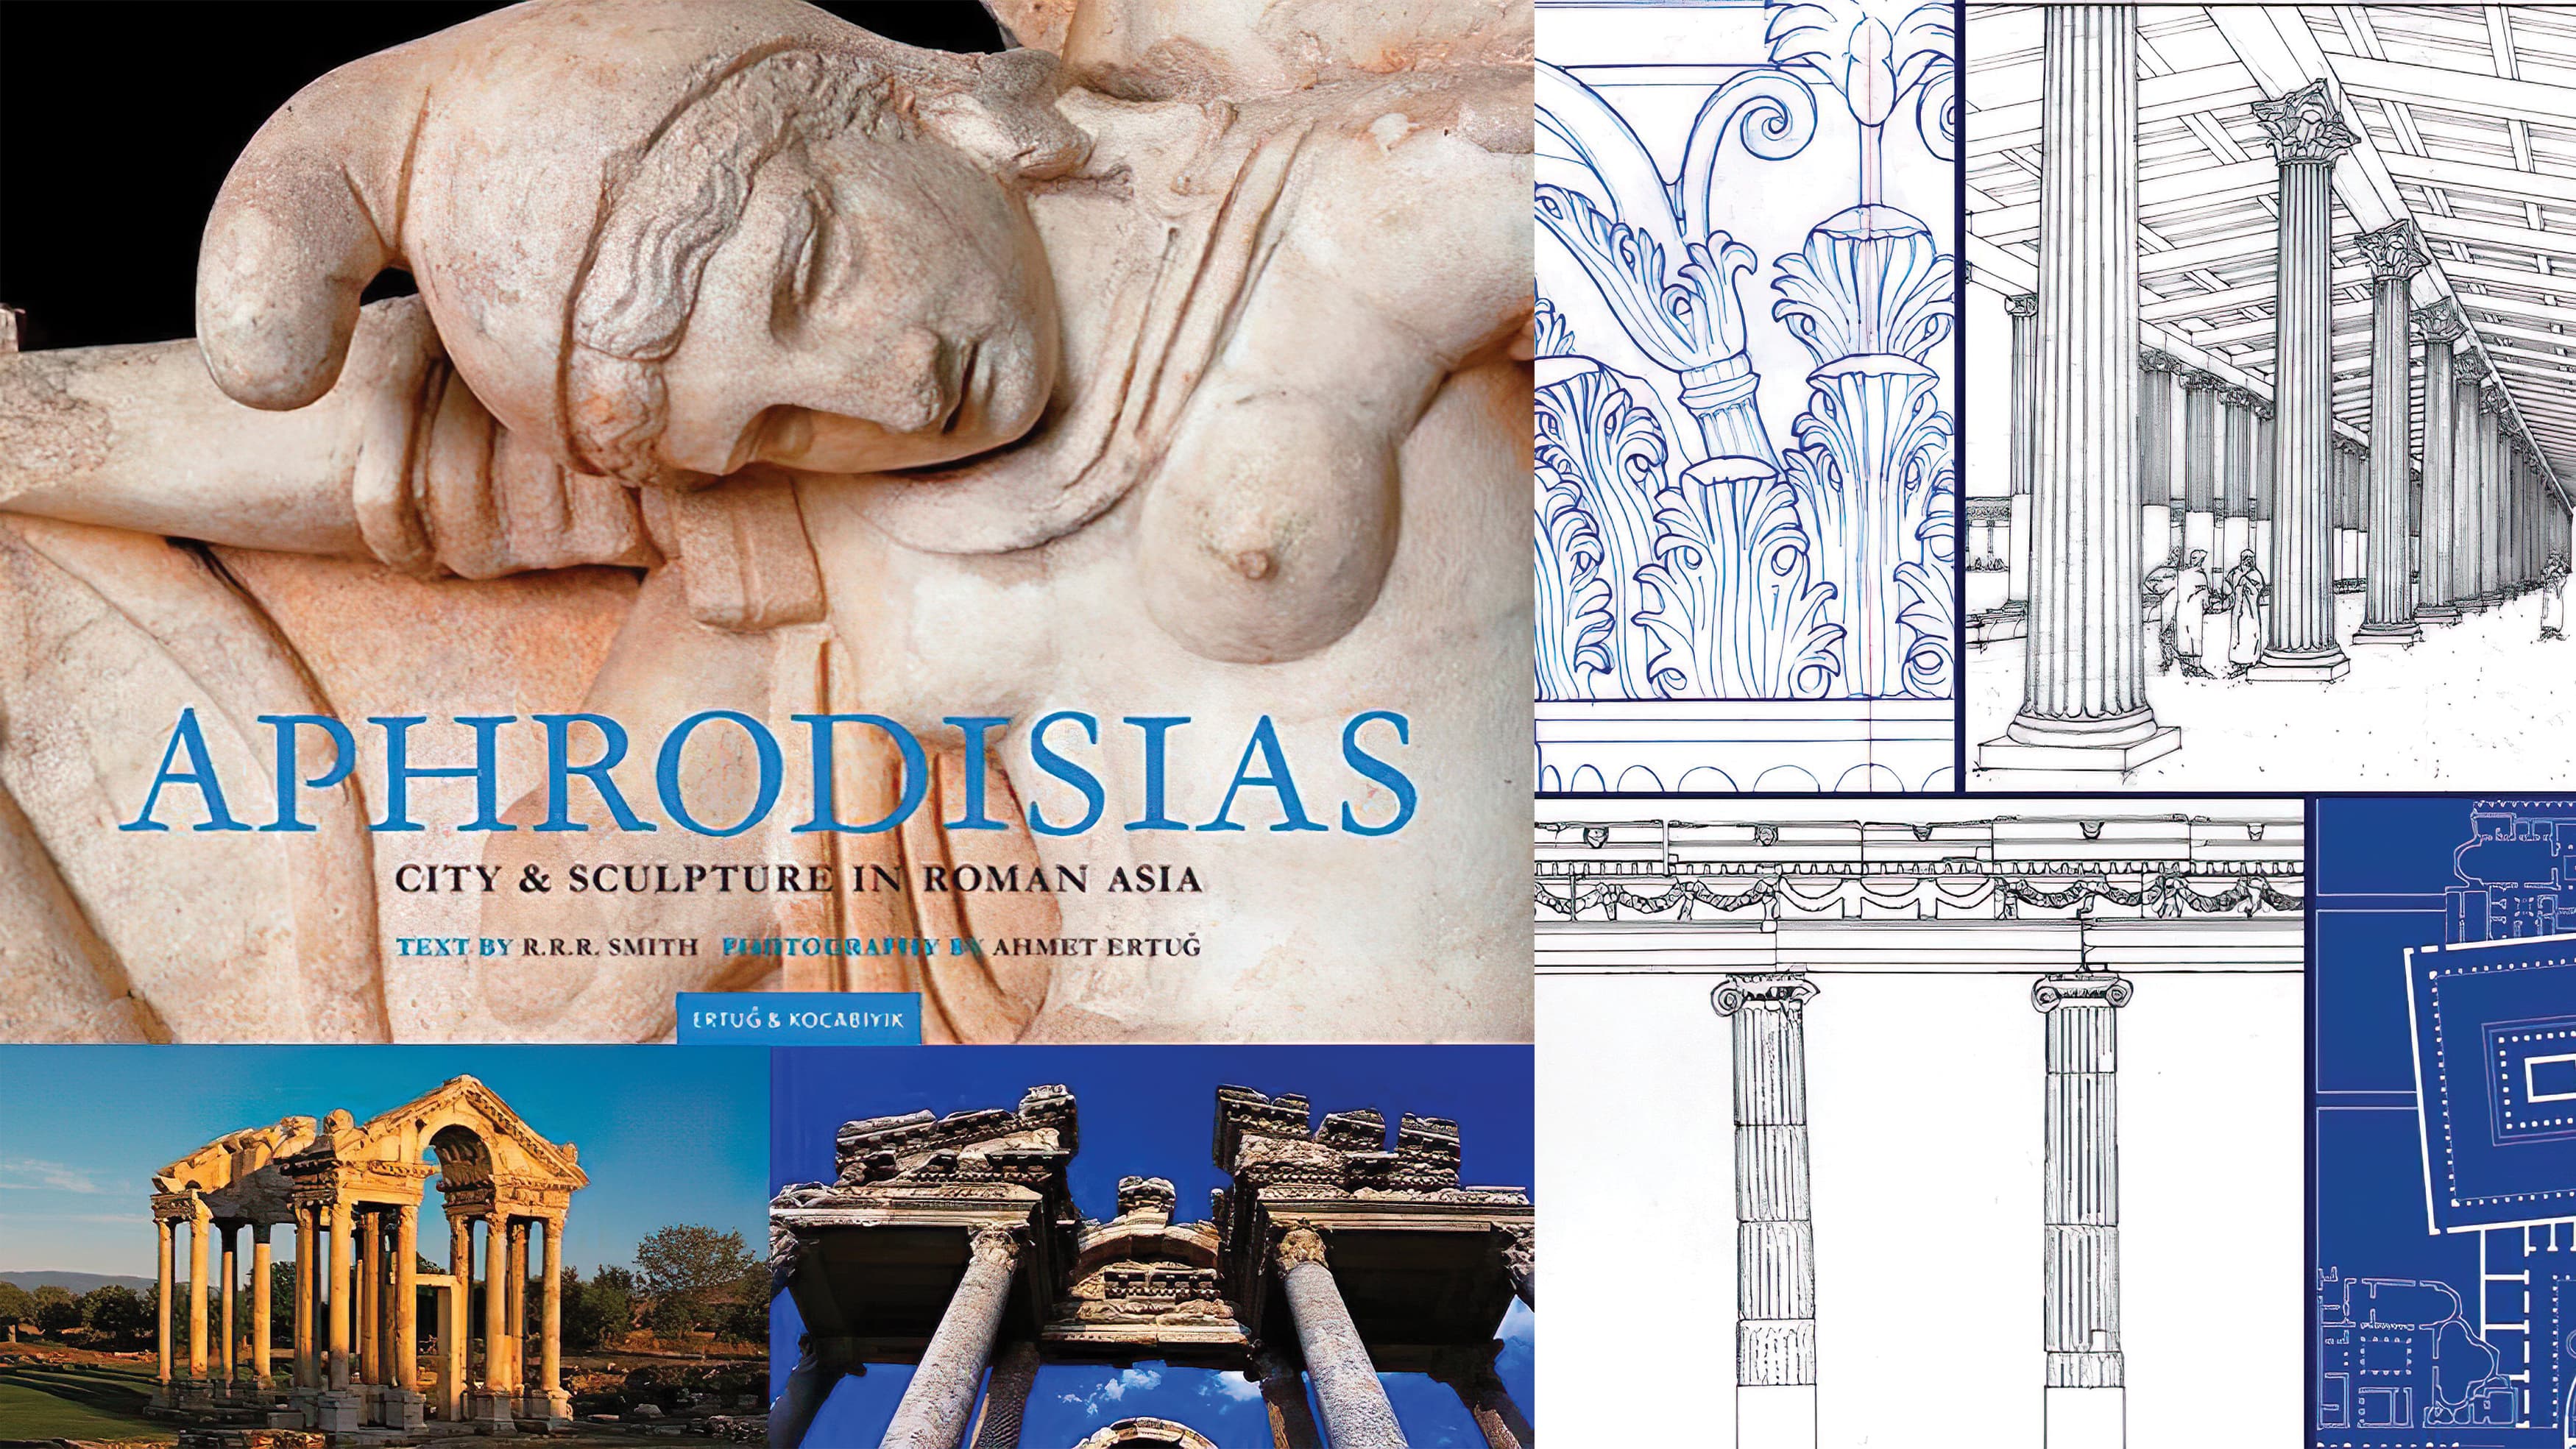 Publication of Aphrodisias in Turkey, in which drawings by Harry Mark were featured